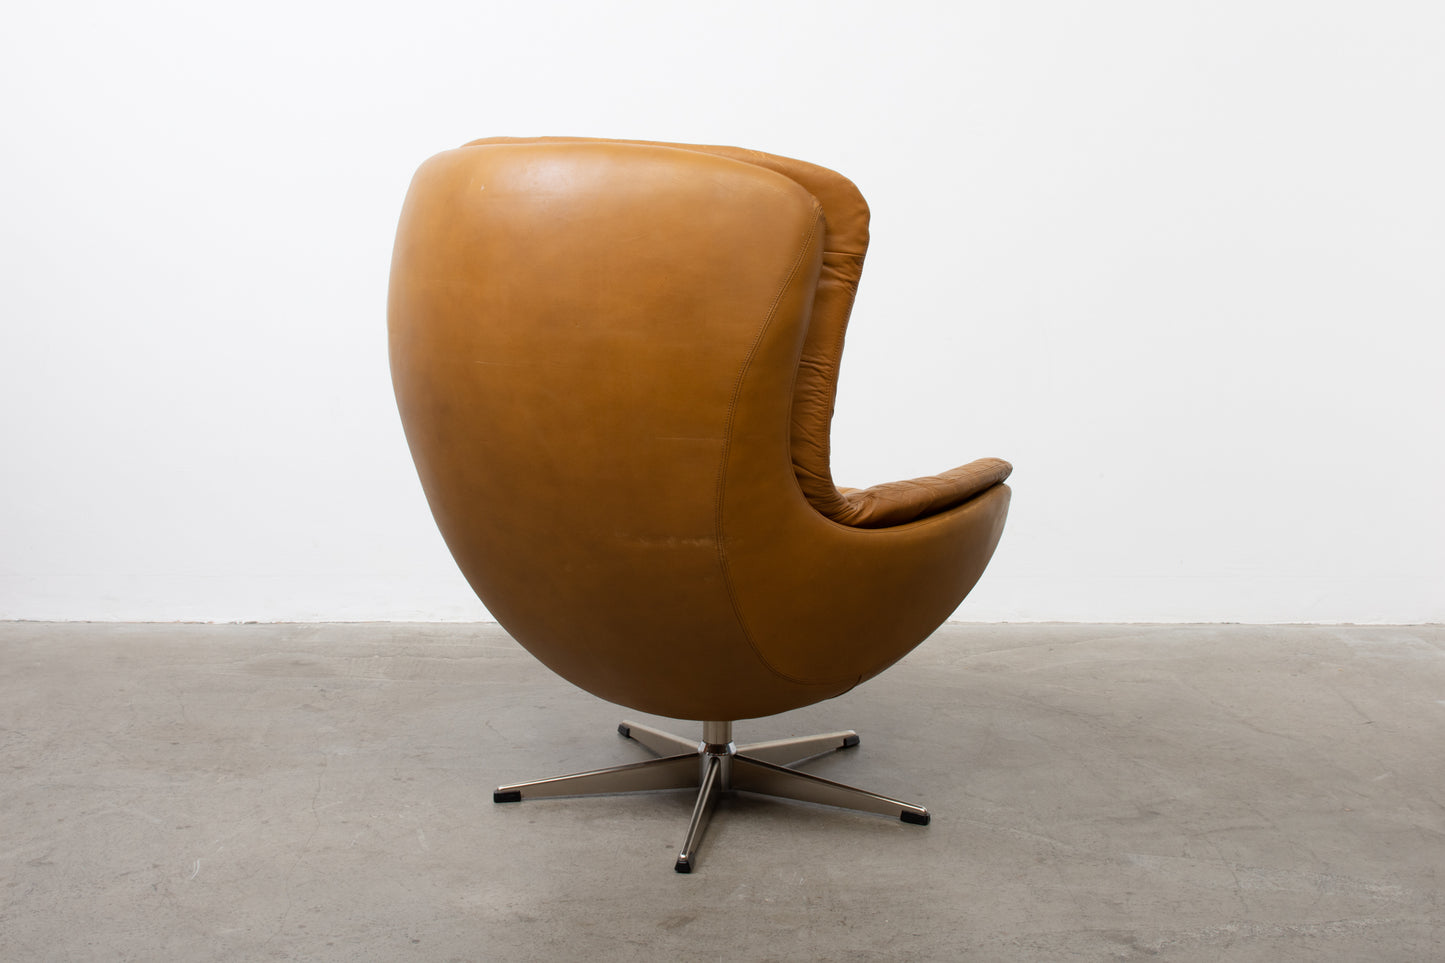 1960s leather swivel chair with foot stool